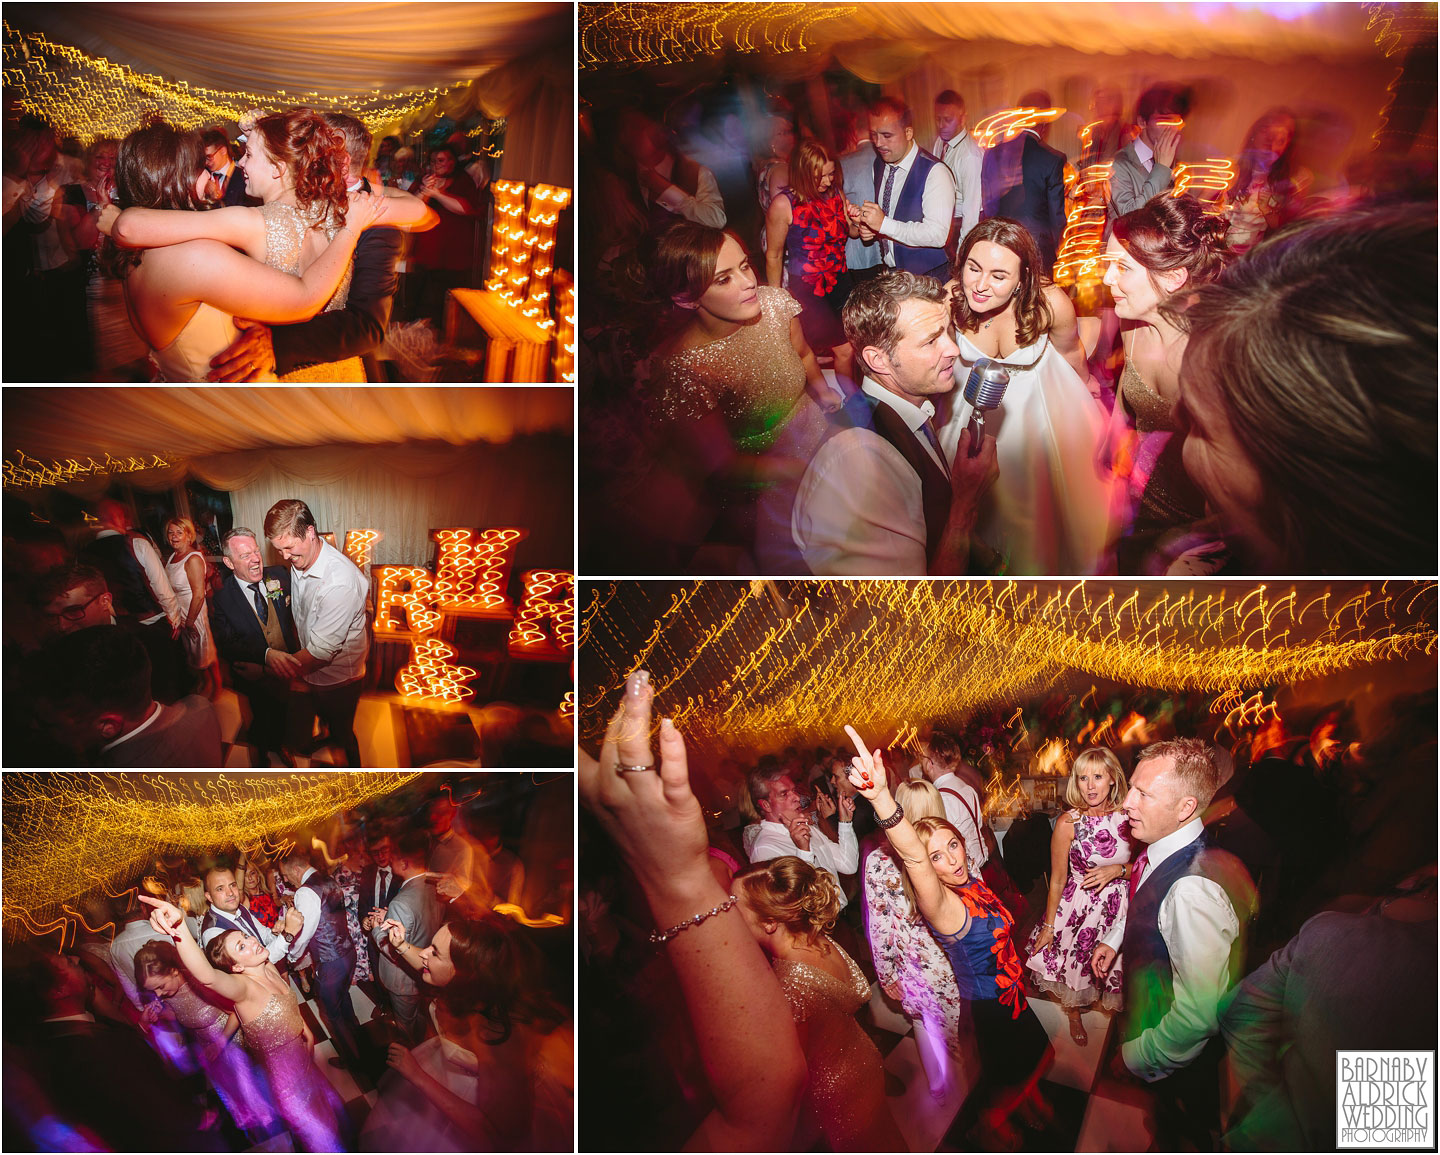 Summer wedding photography at the Inn at Whitewell; Clitheroe Wedding Photographer Lancashire; Lancashire Wedding photography; Barnaby Aldrick Wedding Photography